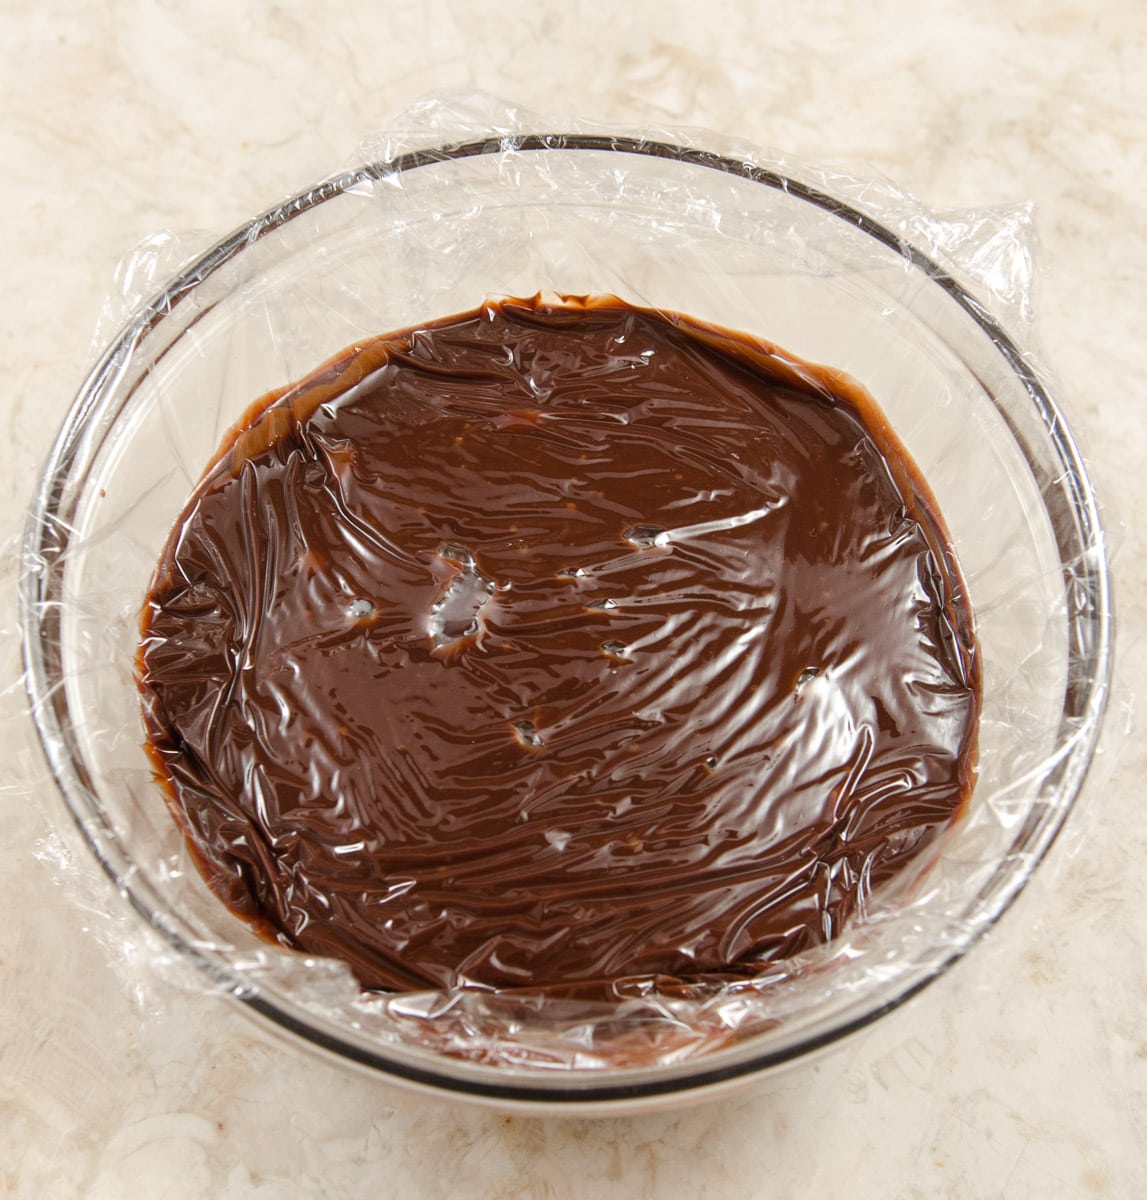 The chocolate truffle mixture is transferred to a bowl and covered with plastic wrap to cool.